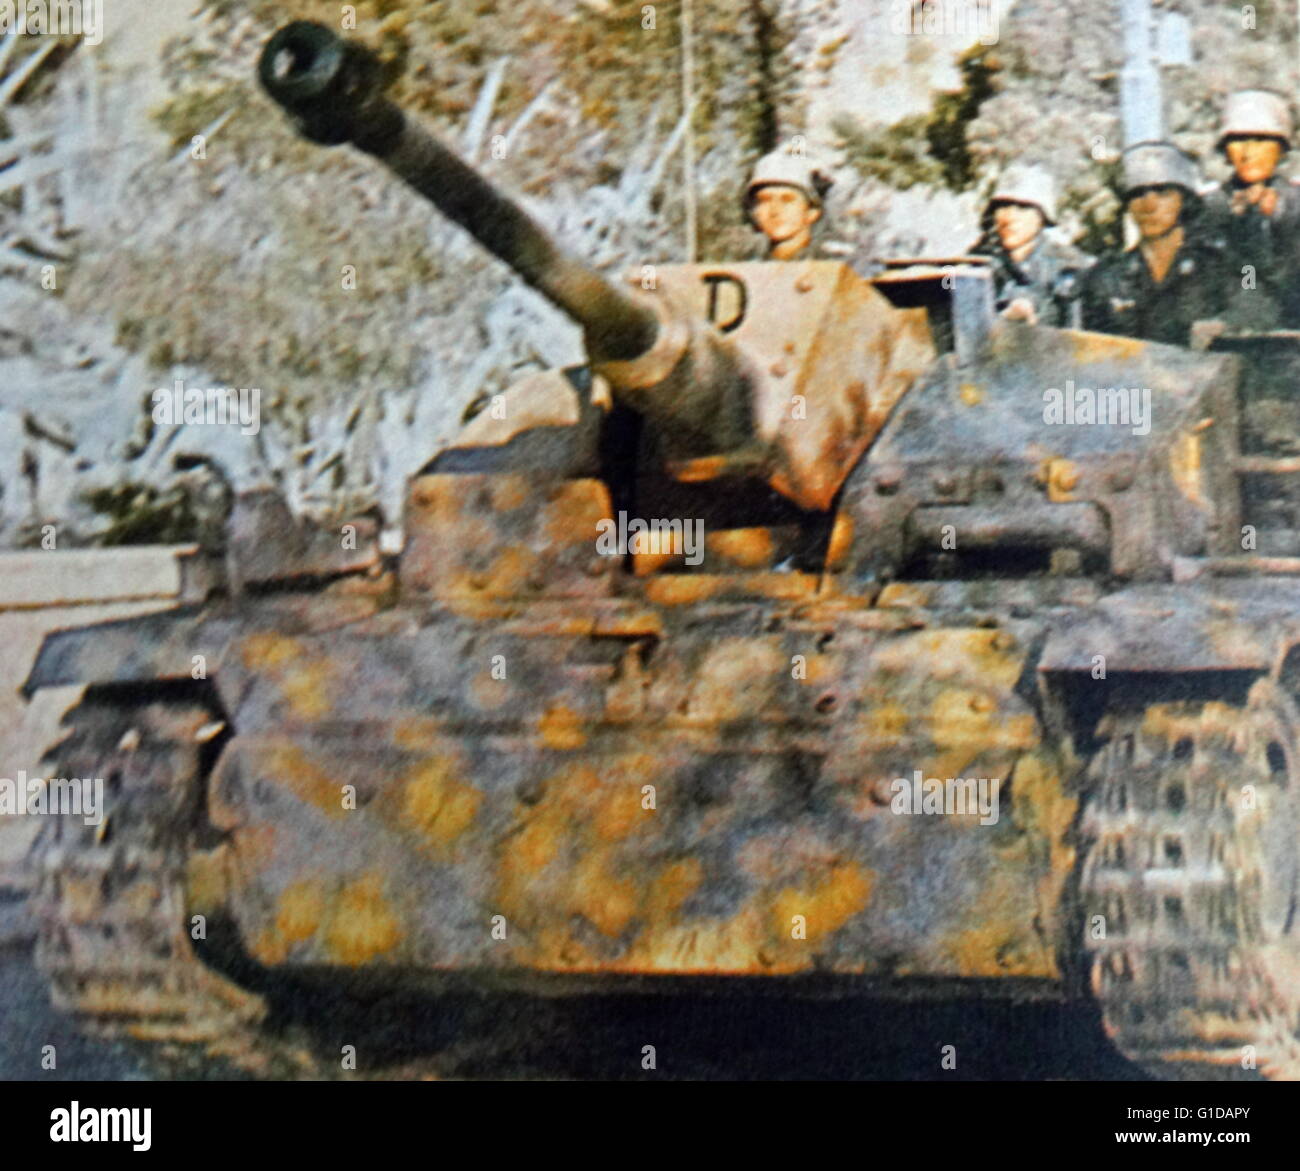 Panzer tank and soldiers during World War II. Originally used for training purposes, these tanks were eventually seen in action. Stock Photo